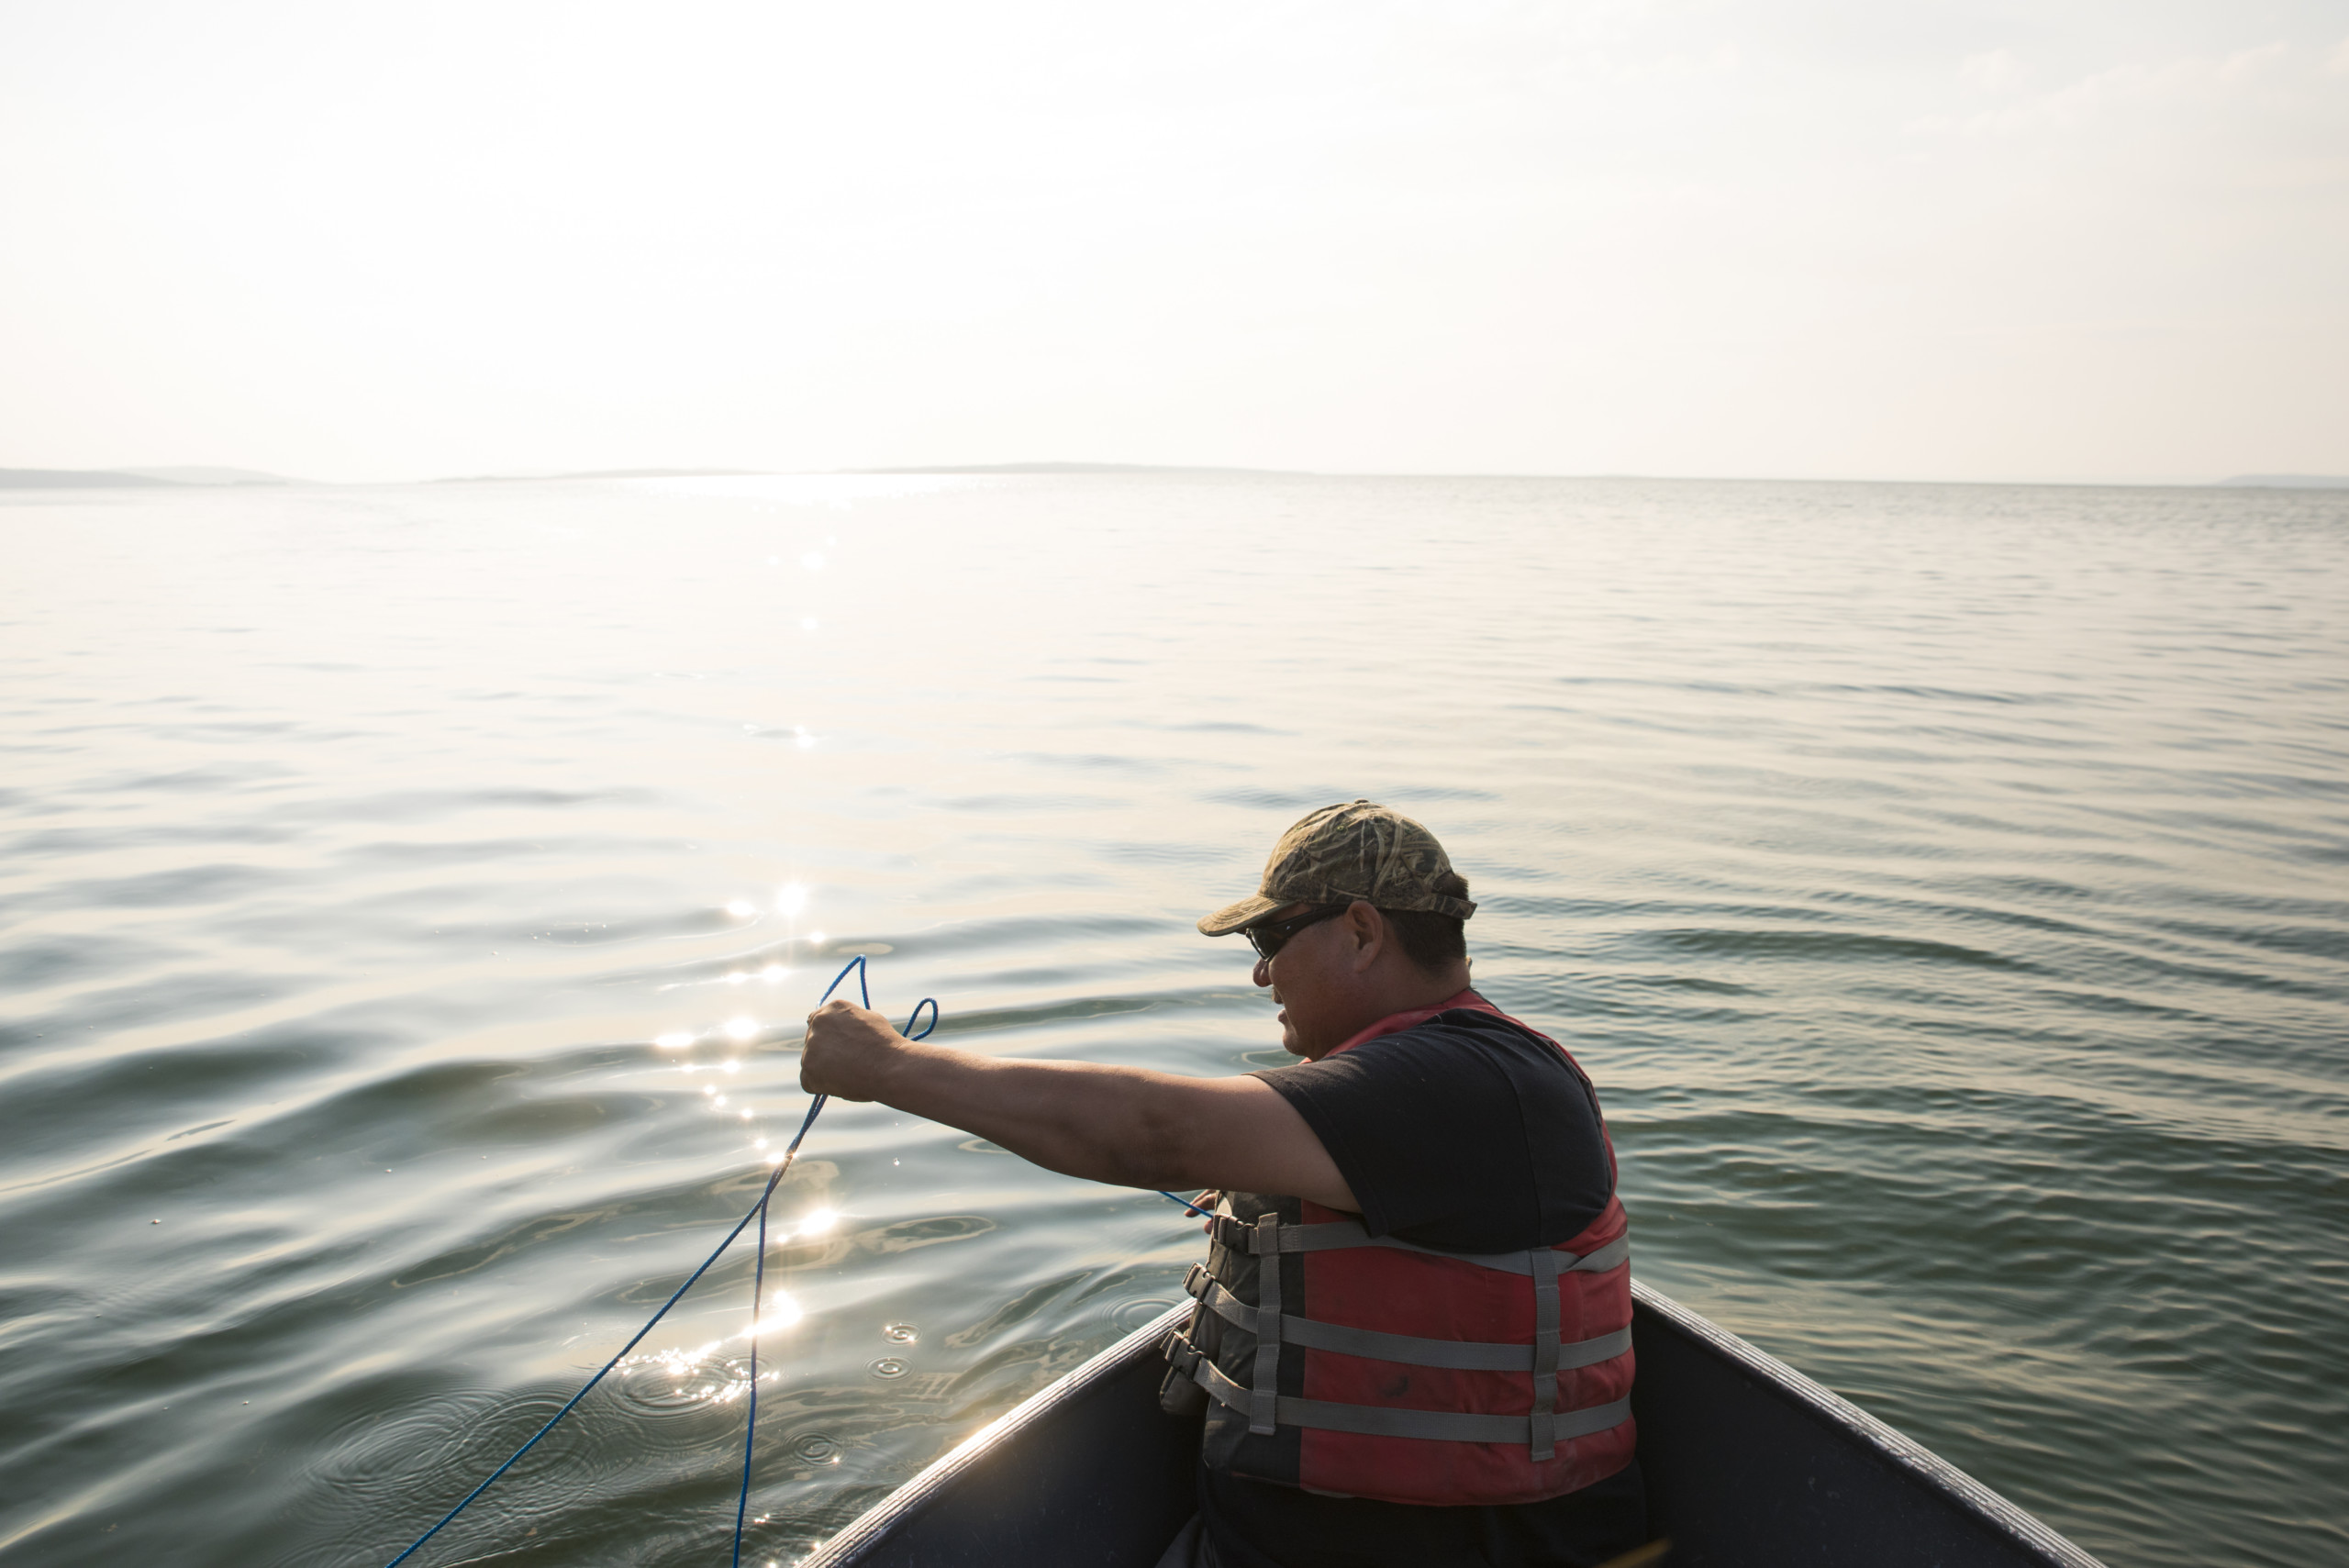 A man on a small fishing boat on calm water. The sun glows brilliantly, so the water reflects gold as well, blending with the sunlight at the horizon